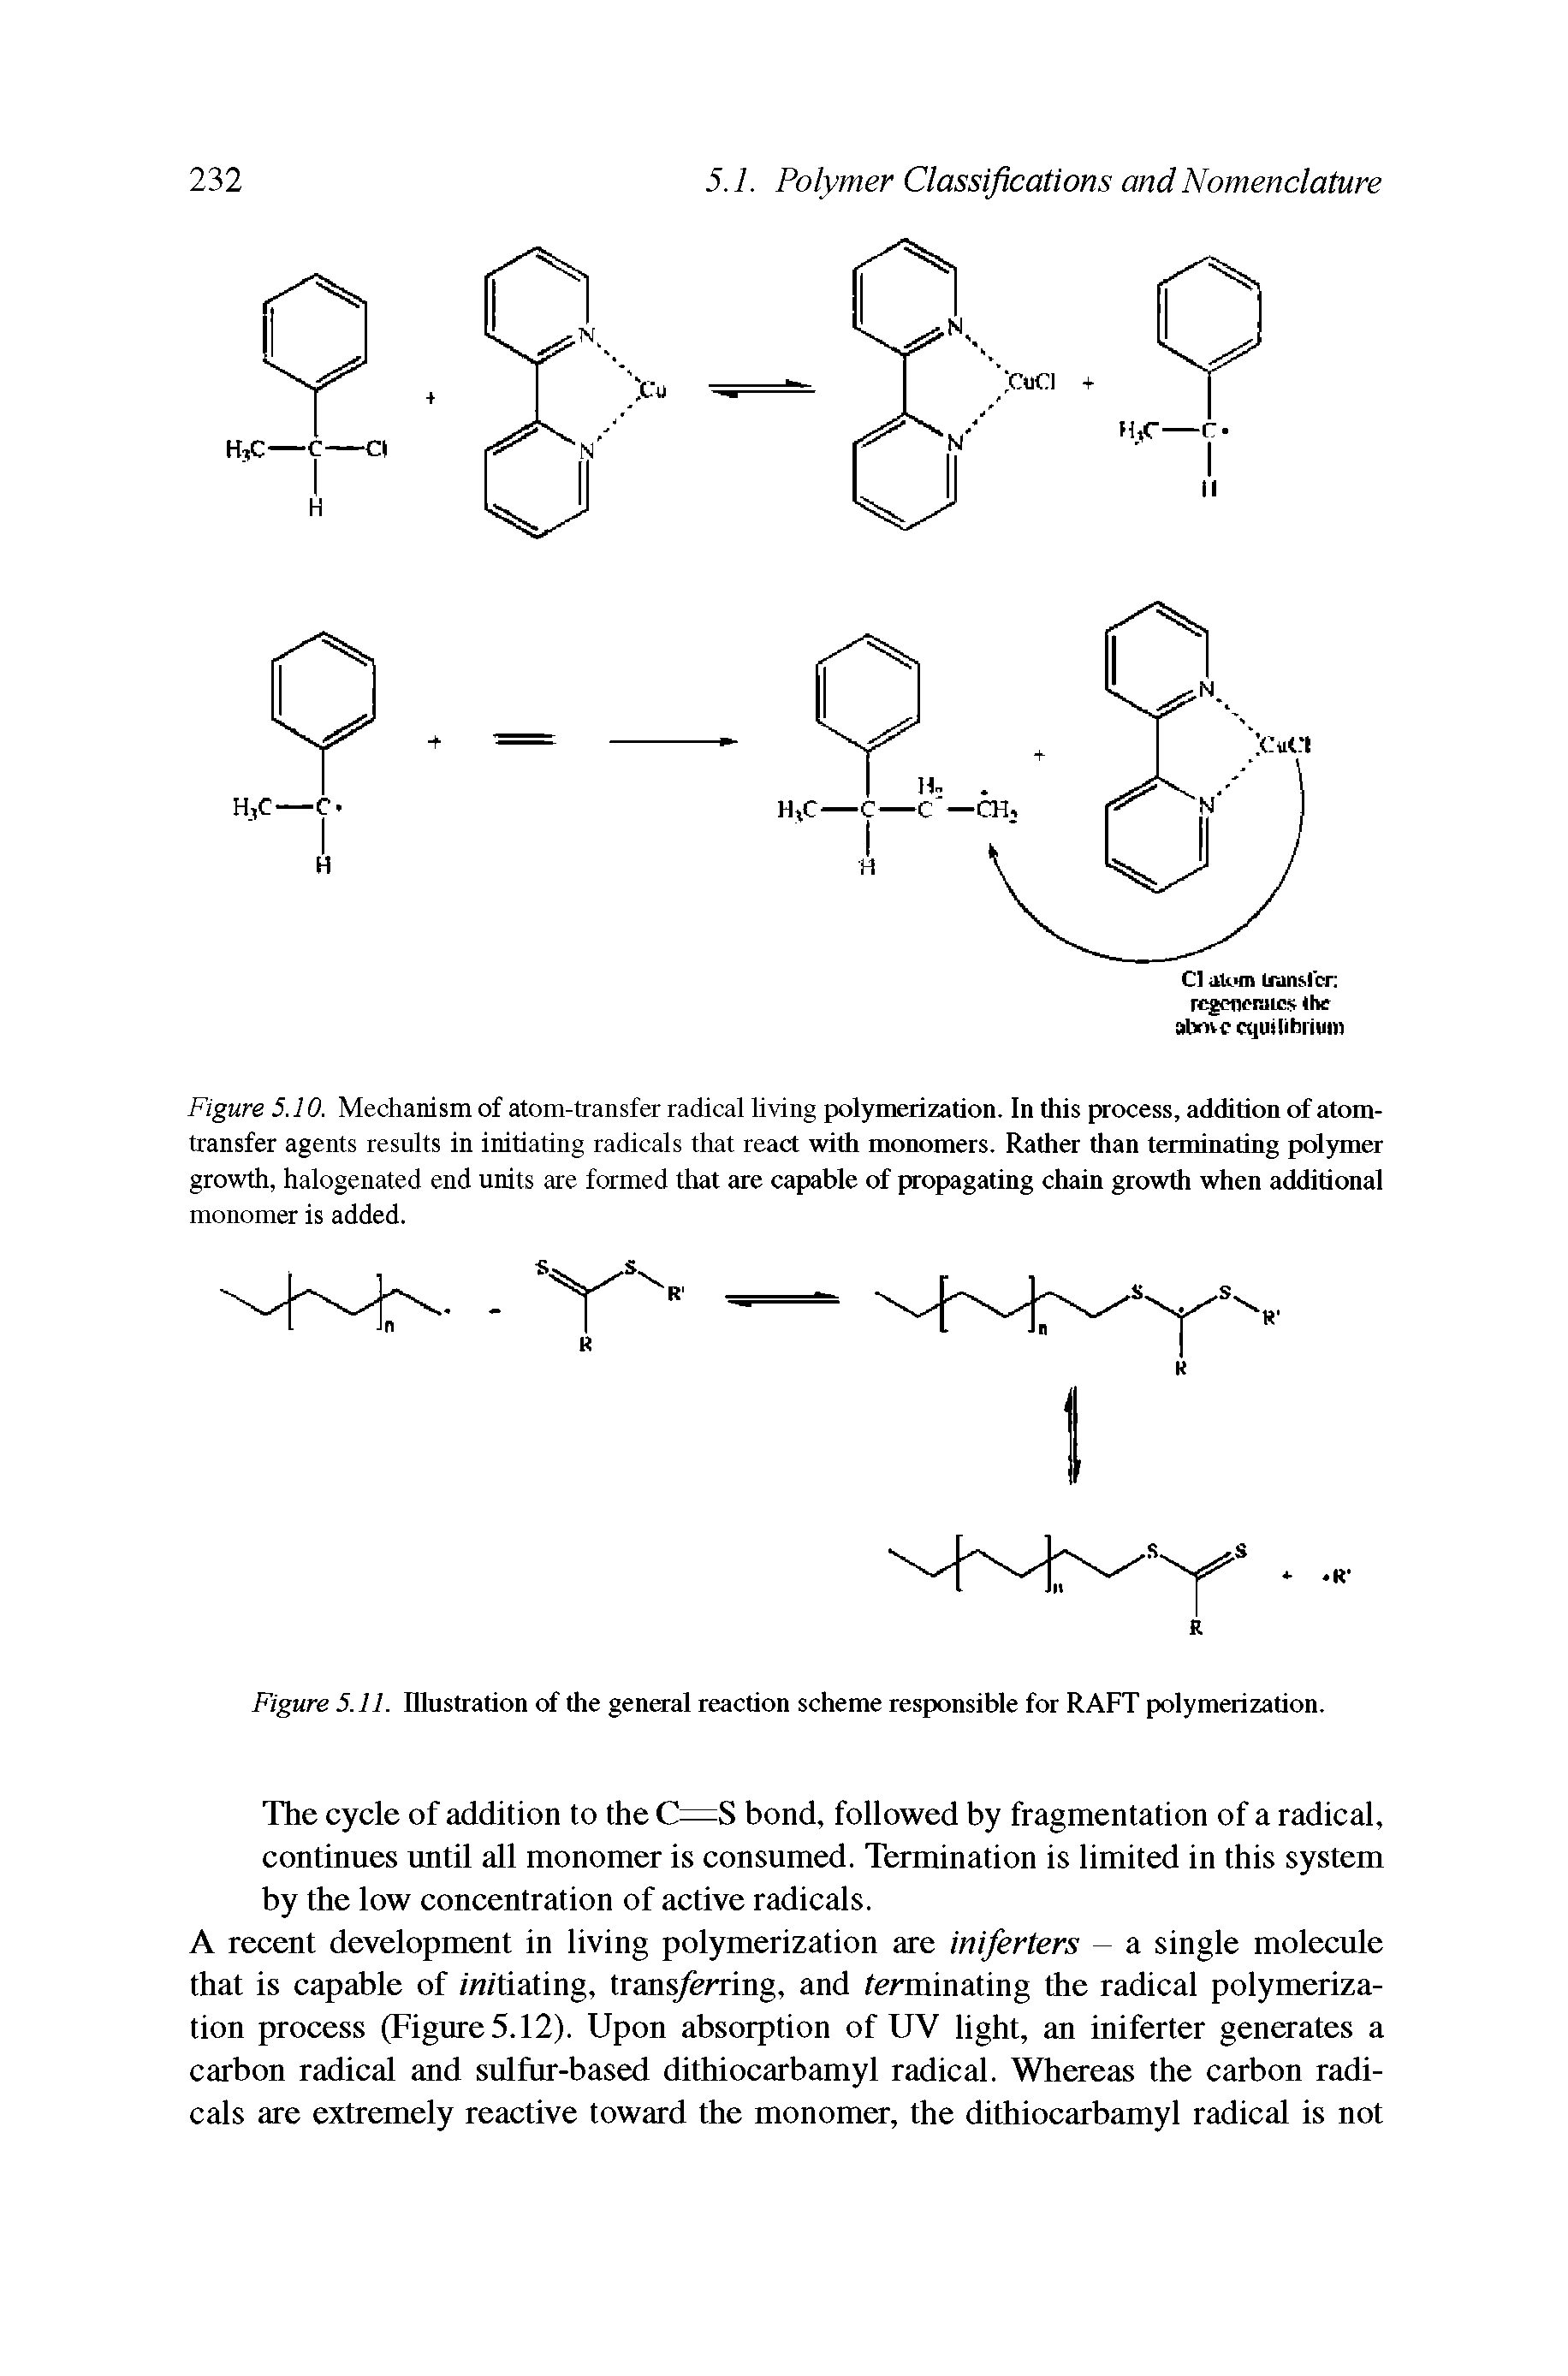 Figure 5.11. Illustration of the general reaction scheme responsible for RAFT polymerization.